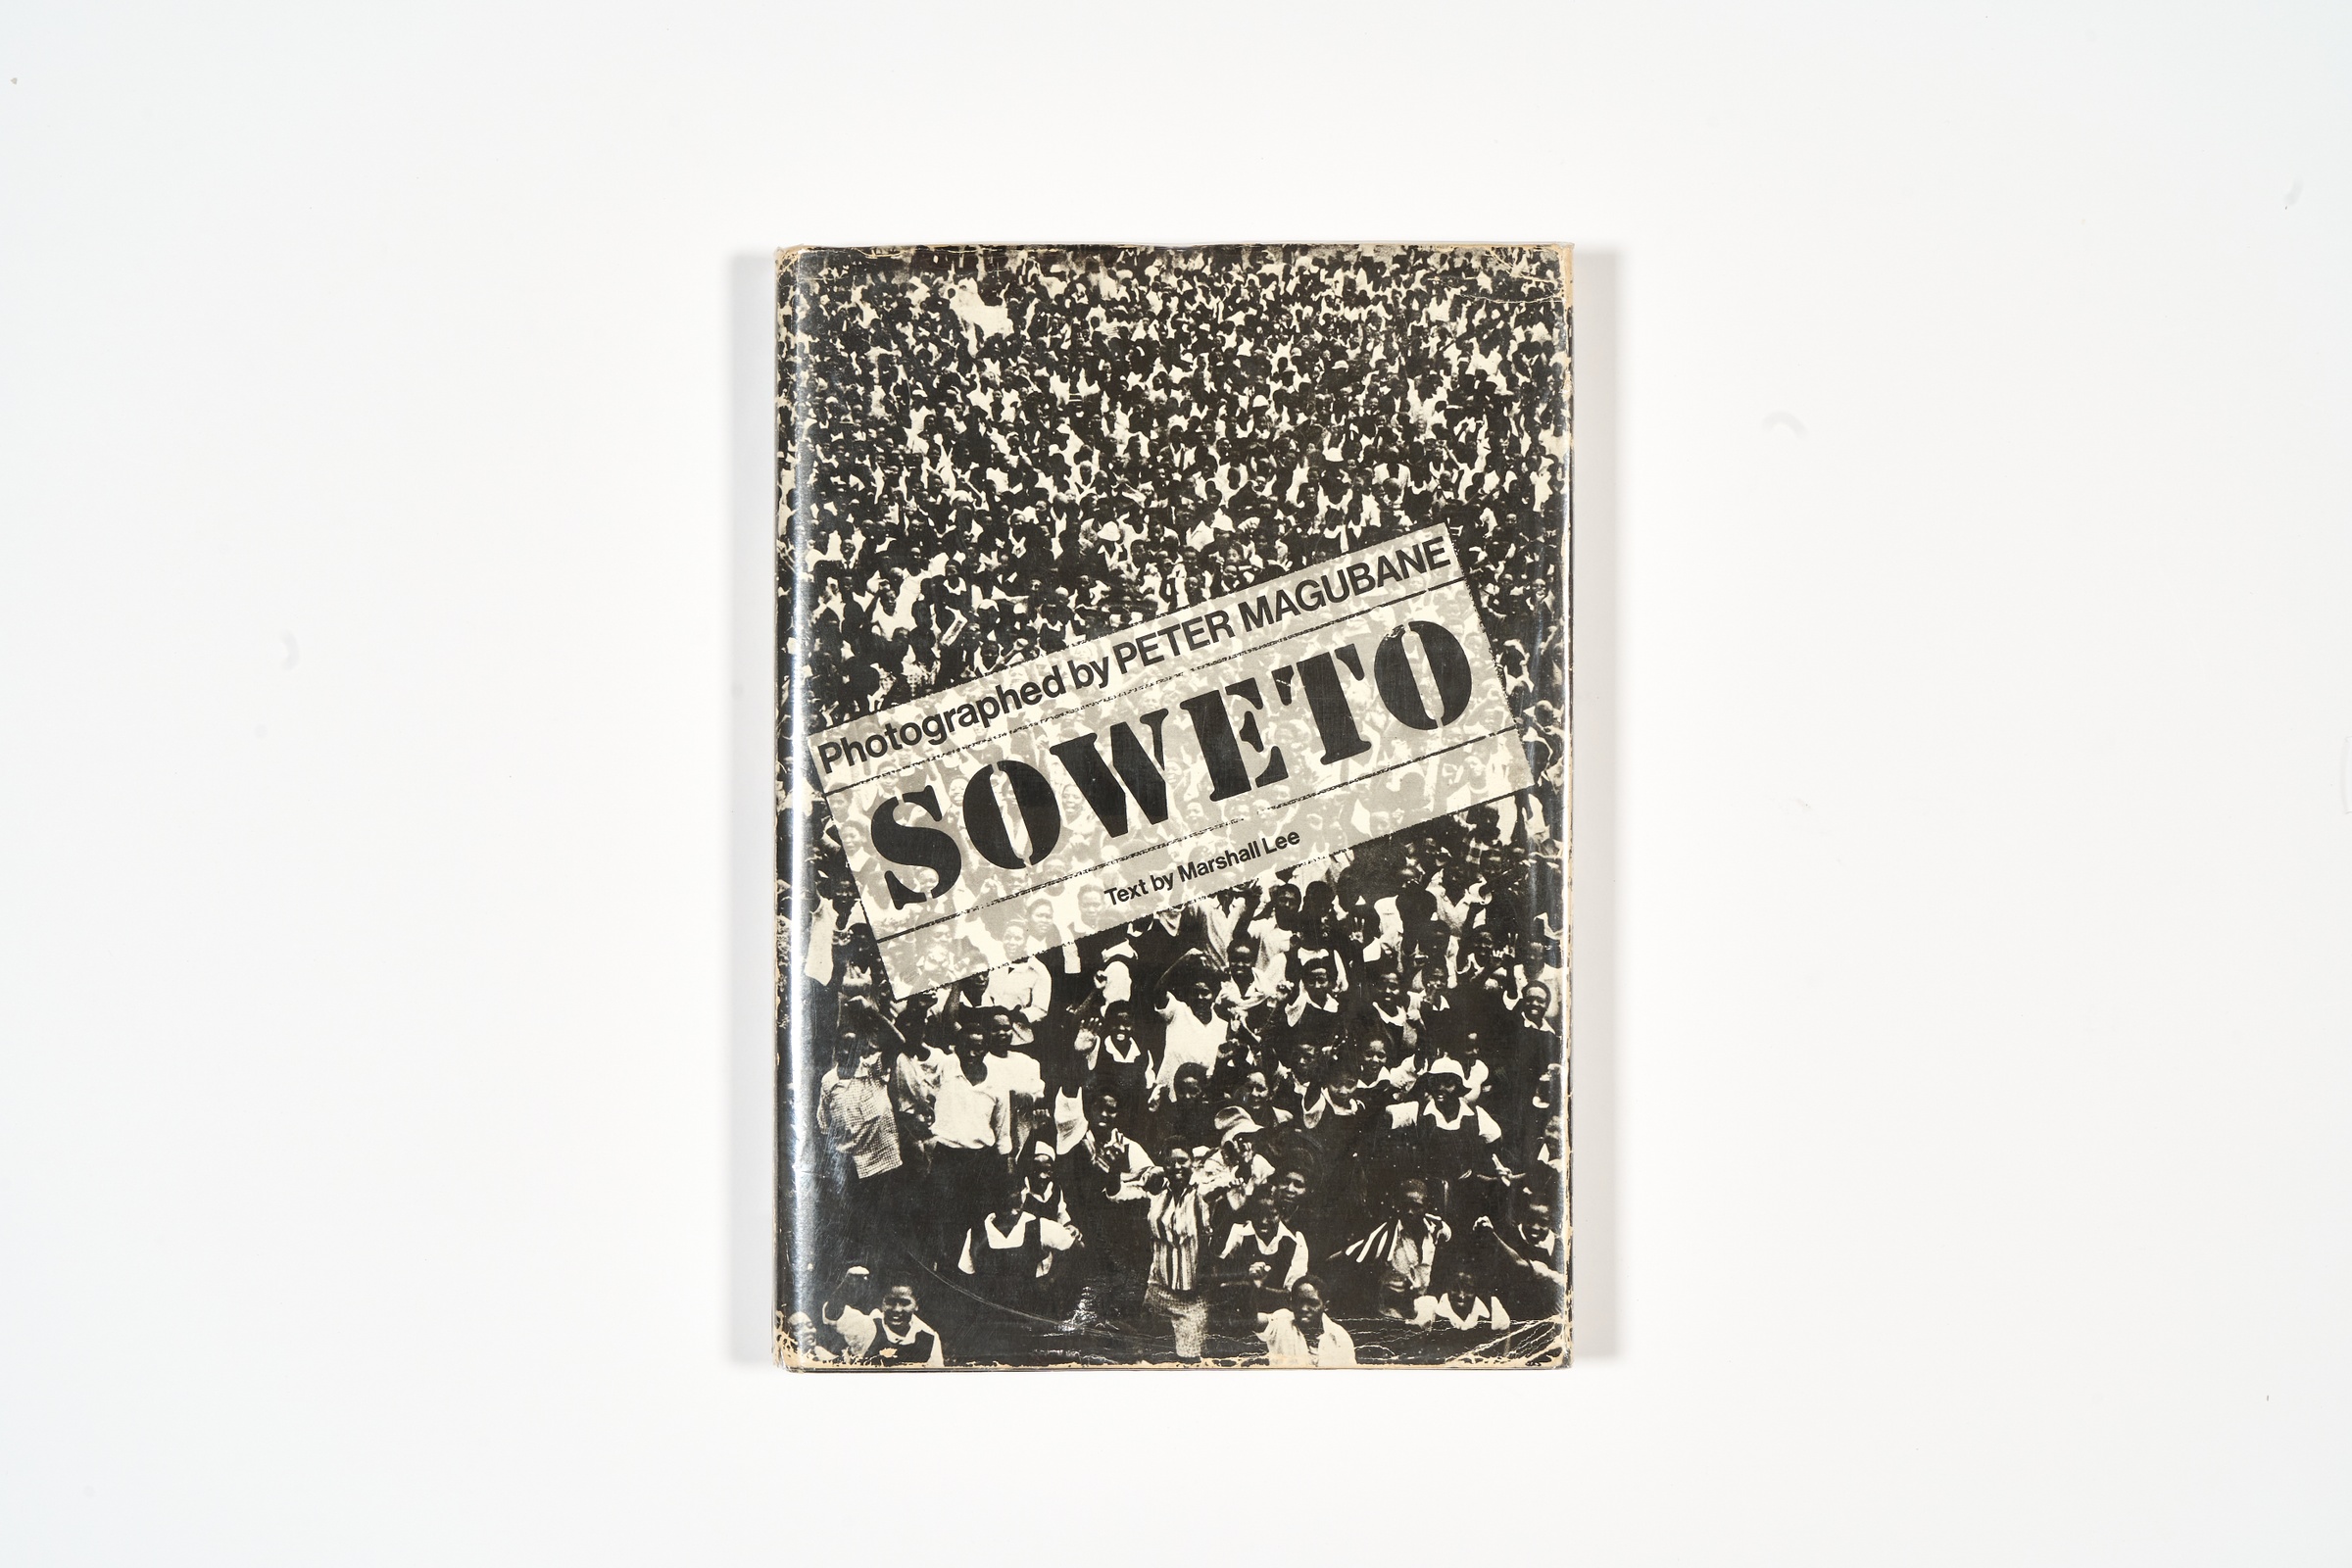 A topdown photograph of the cover of Peter Magubane's photo-book 'Soweto' on a white background.
